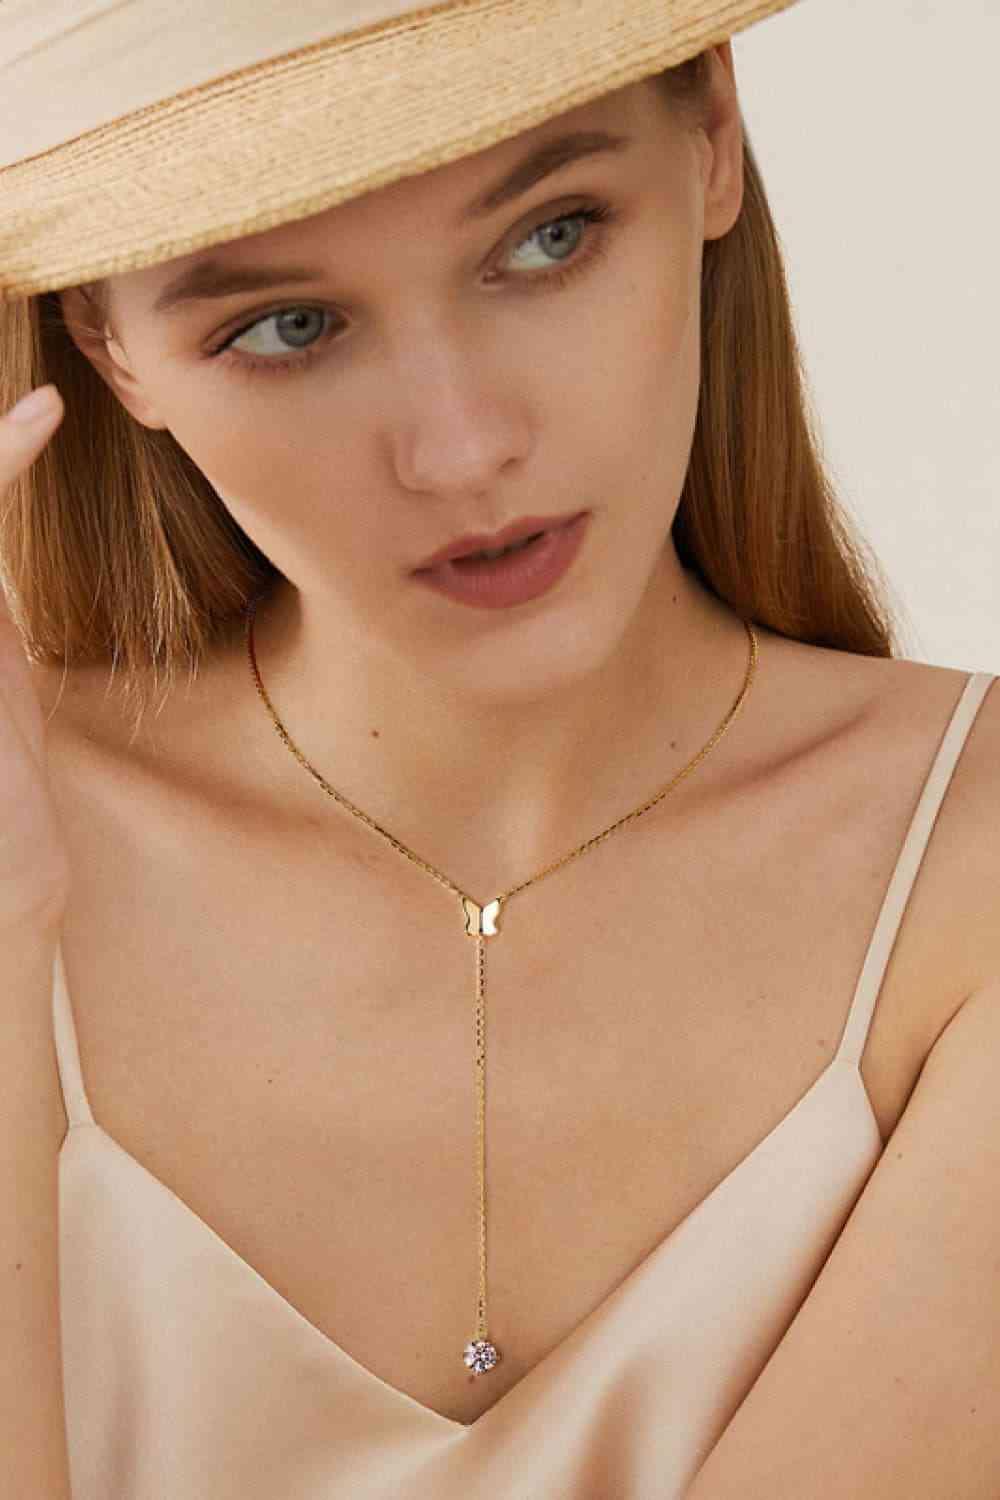 a woman wearing a hat and a necklace